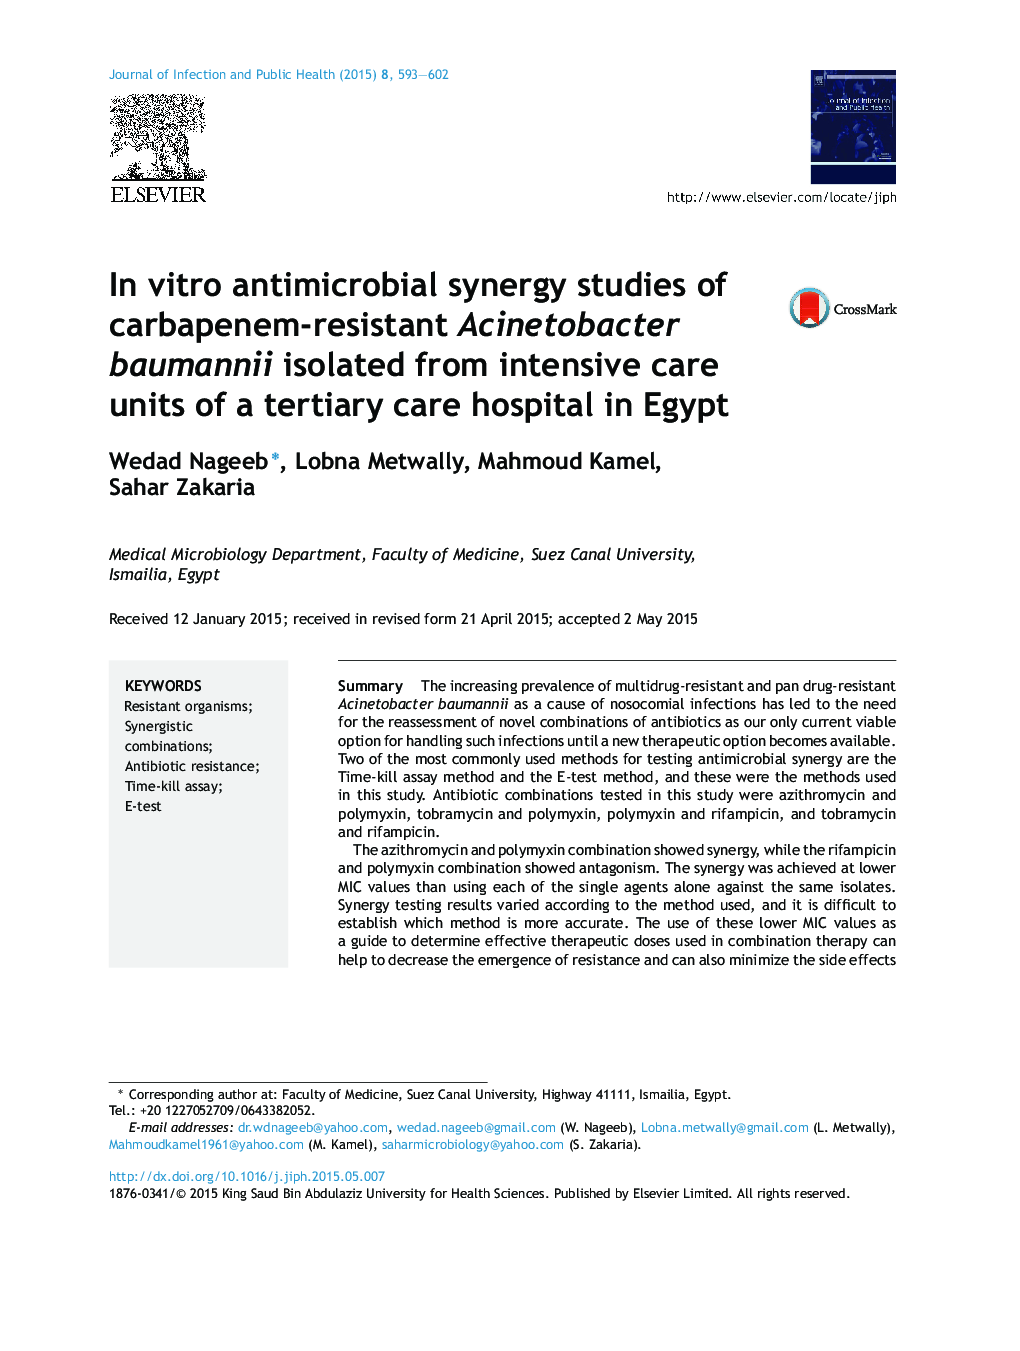 In vitro antimicrobial synergy studies of carbapenem-resistant Acinetobacter baumannii isolated from intensive care units of a tertiary care hospital in Egypt